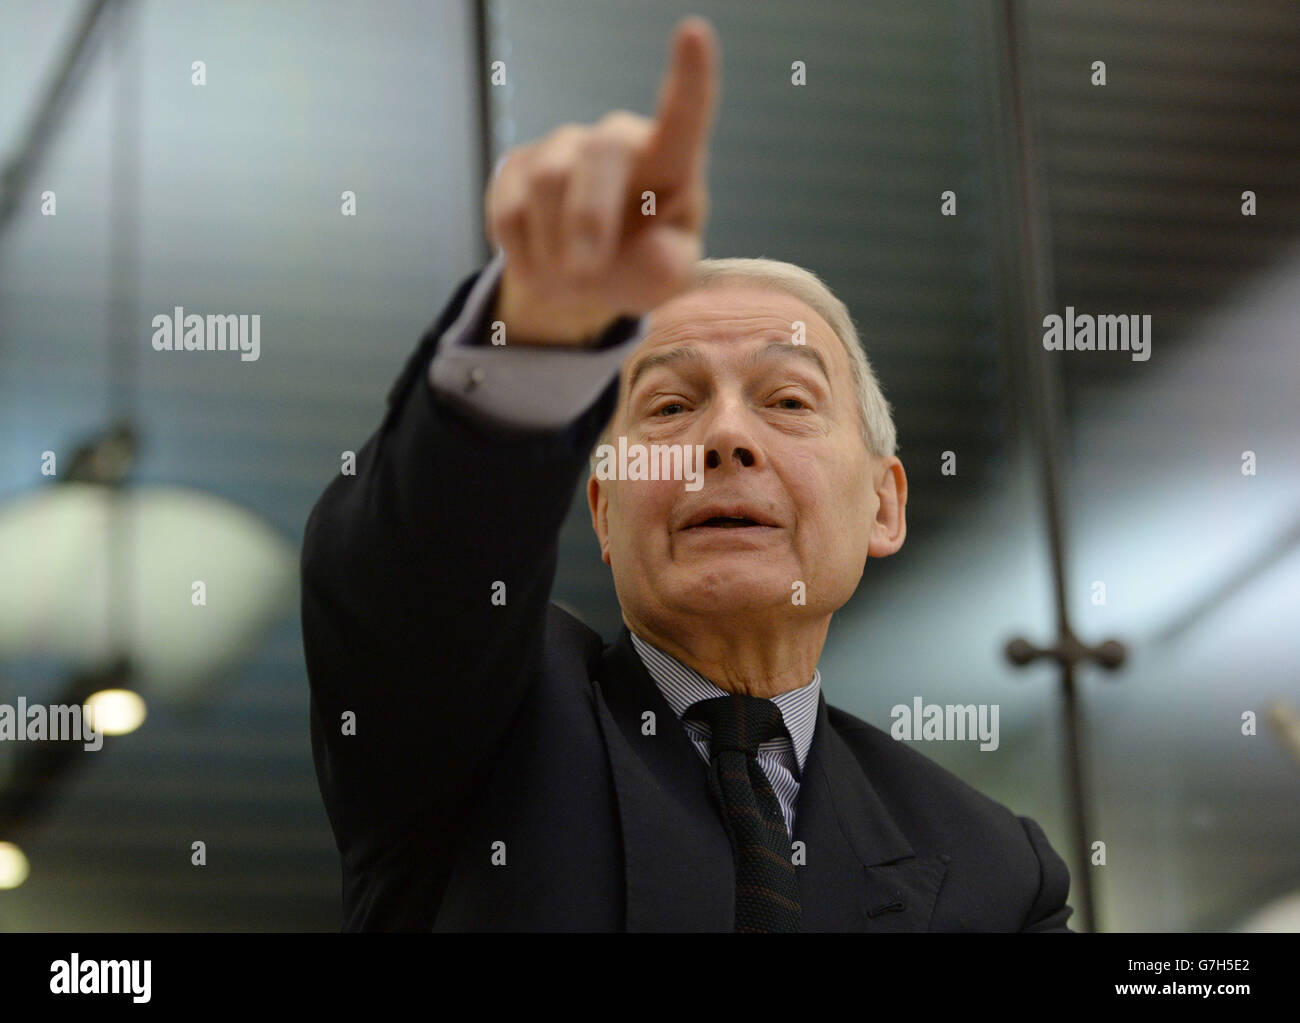 Labour MP Frank Field speaks at the All-Party Parliamentary Inquiry into Hunger in the UK in the House of Commons, London which launches a blueprint to eliminate hunger in Britain by 2020. Stock Photo